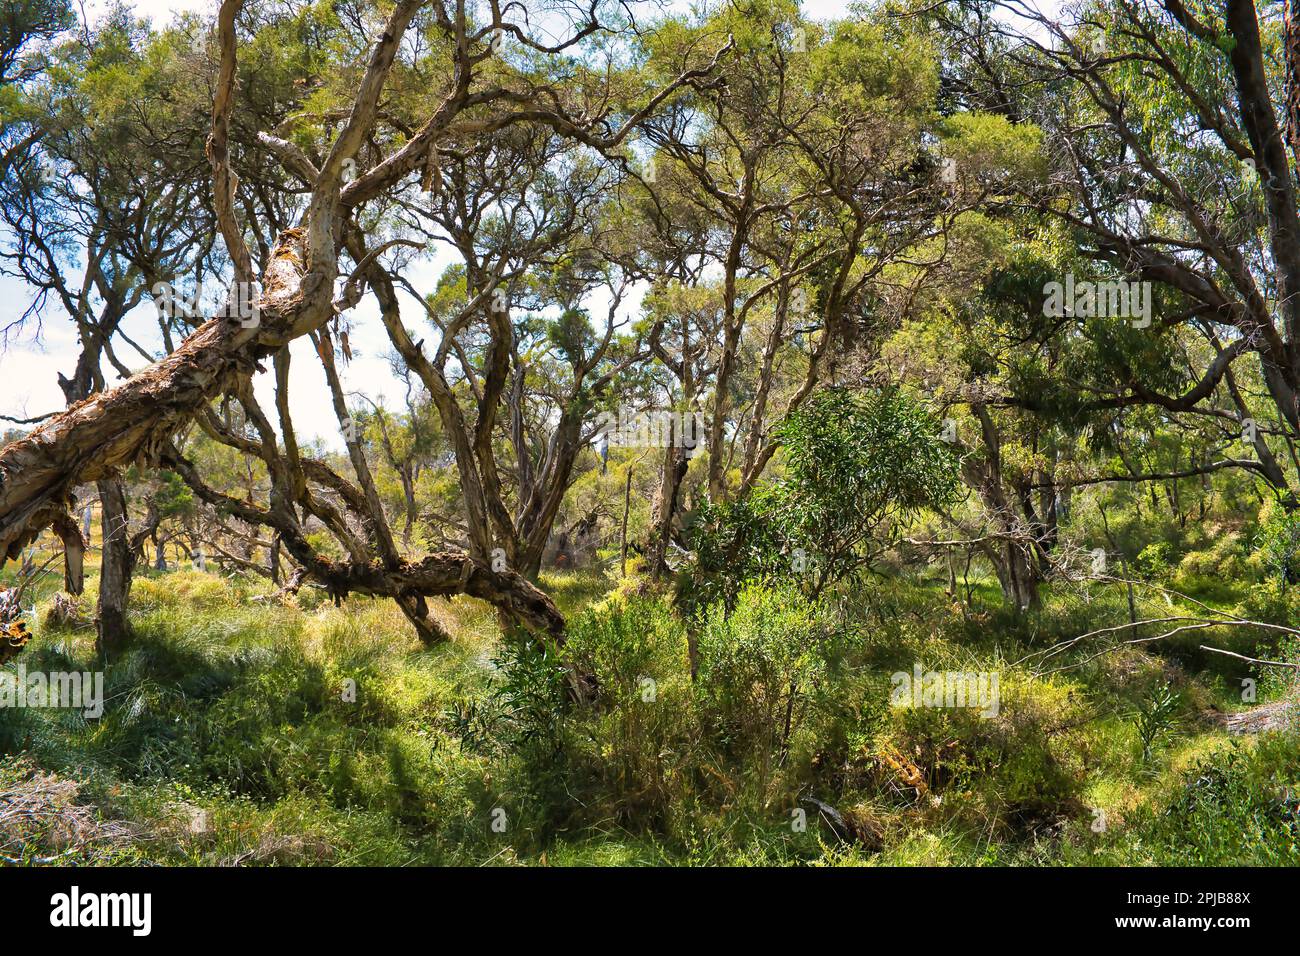 Forest with swamp paperbarks (Melaleuca ericifolia) and an undergrowth of grasses in Leschenault Peninsula near Australind, Western Australia Stock Photo